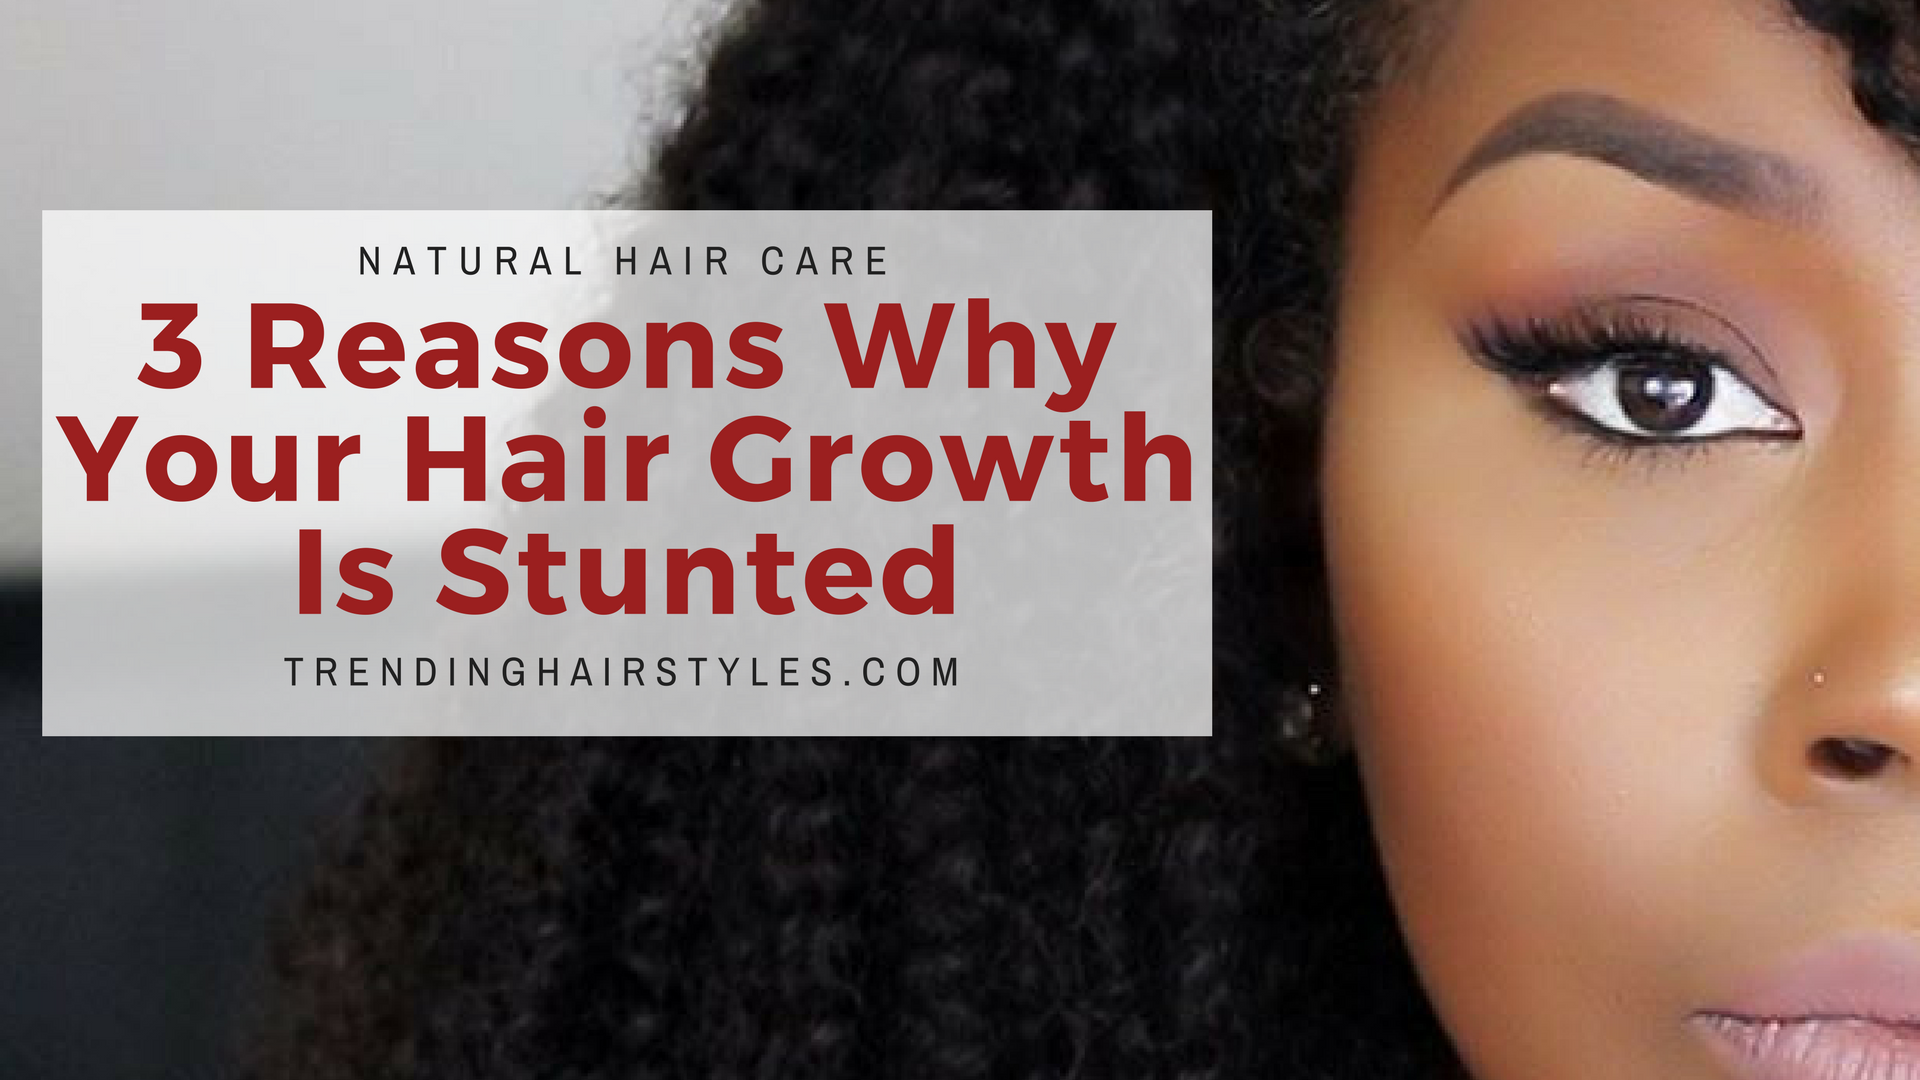 Why Your Hair Growth is Stunted - Natural Hair Journey